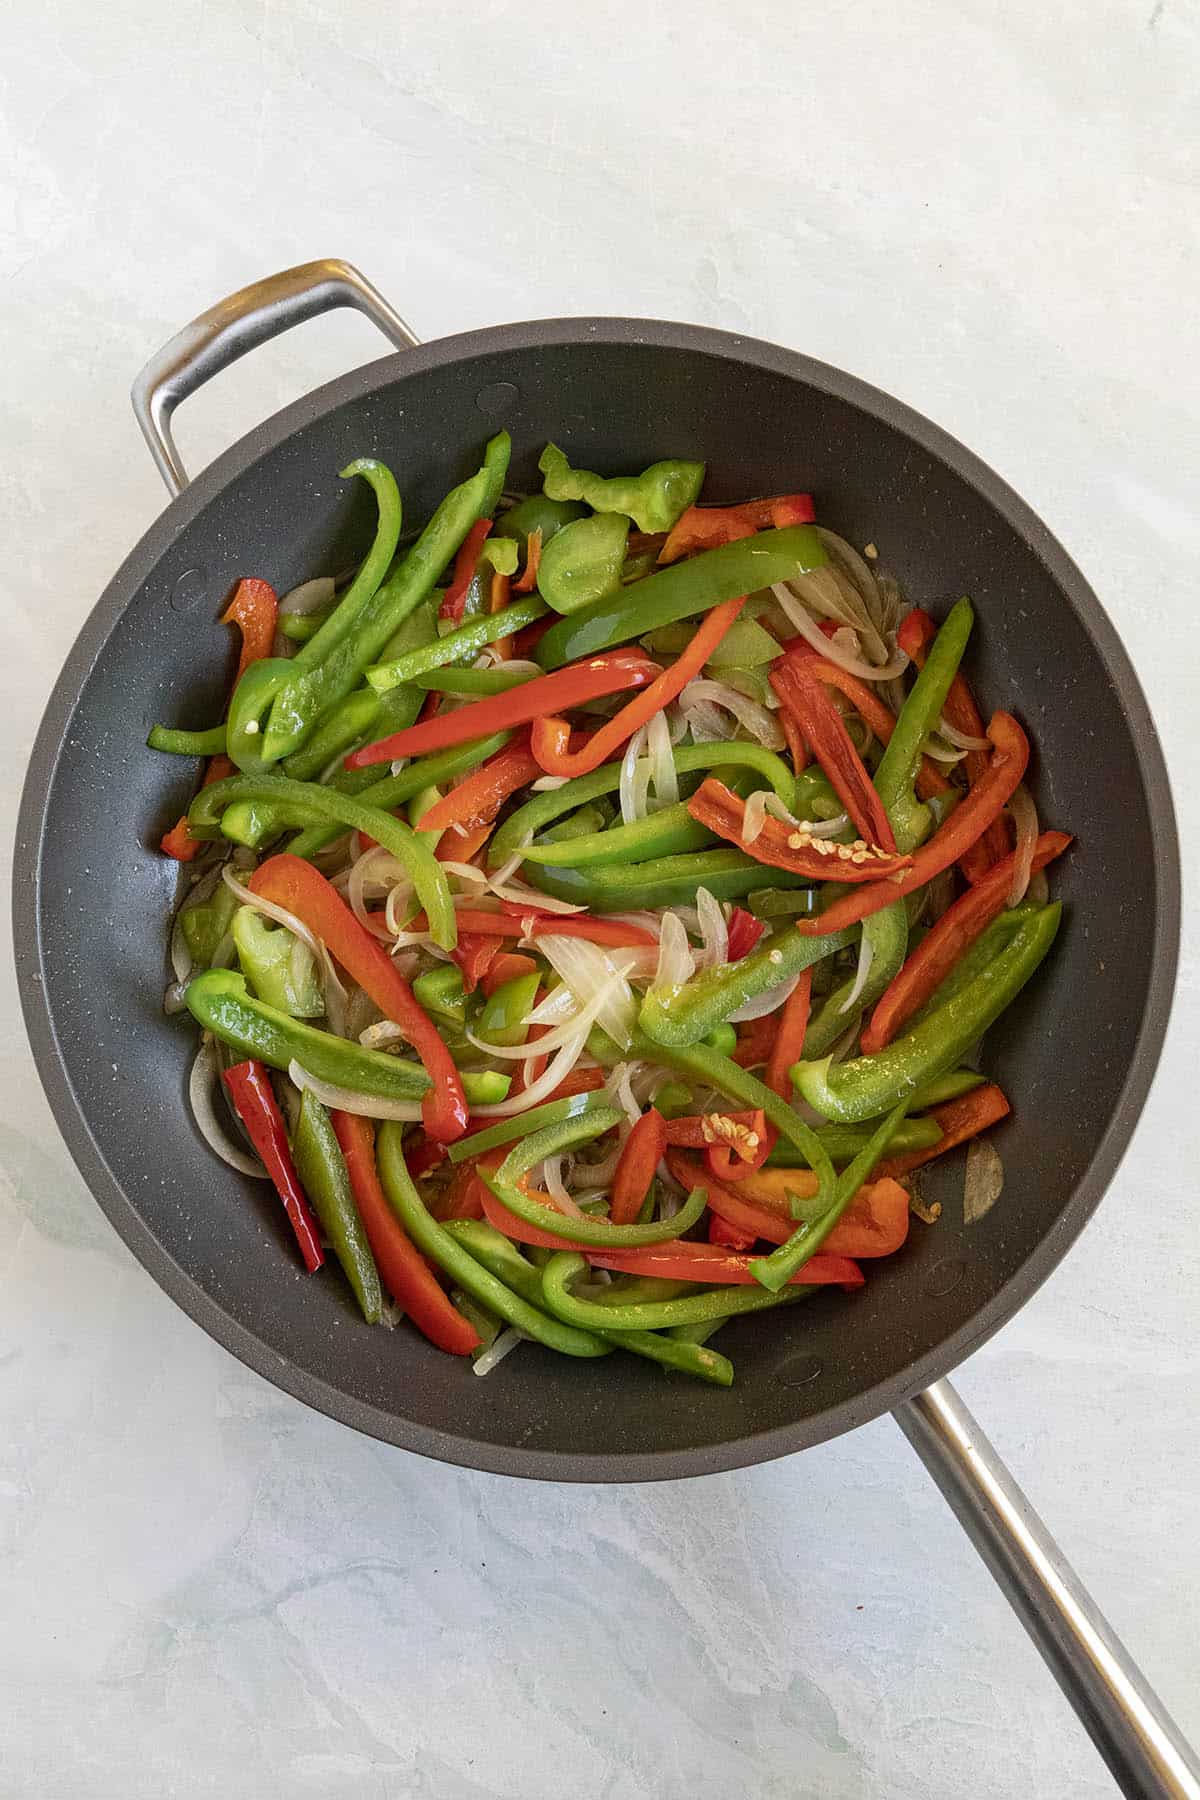 Cooking peppers and onions in a pan to make Piperade